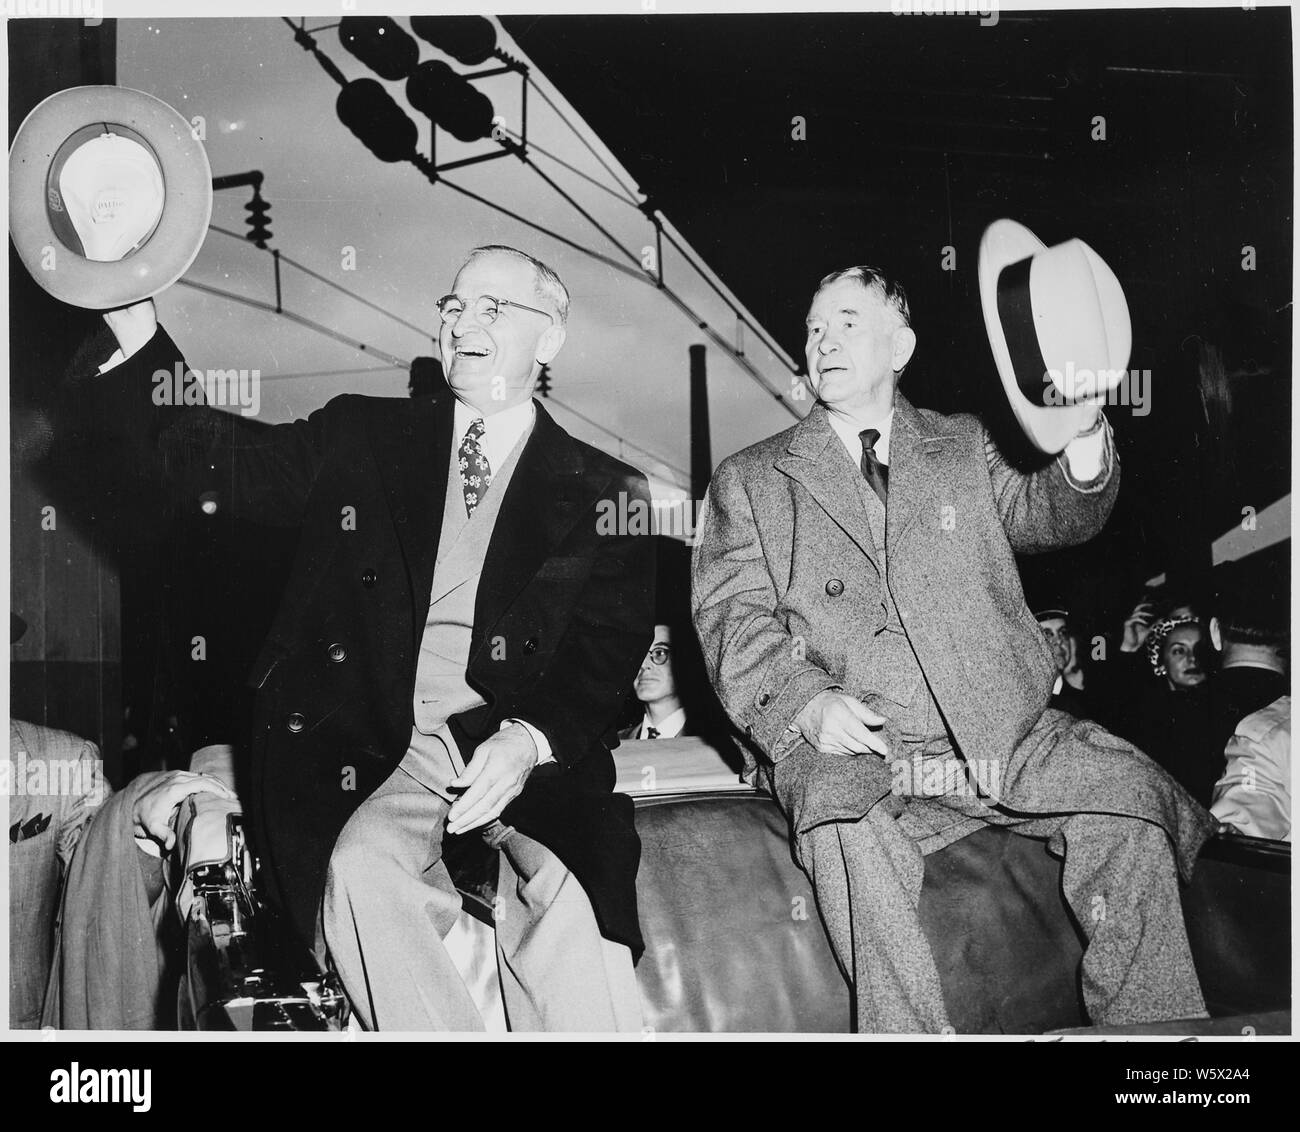 Presdient Harry S. Truman and Vice President-elect Alben W. Barkley in the Washington, DC train station, sitting on the back of an open vehicle, waving their hats to the crowd. Truman and Barkley had just returned to Washington after winning the 1948 election. Stock Photo